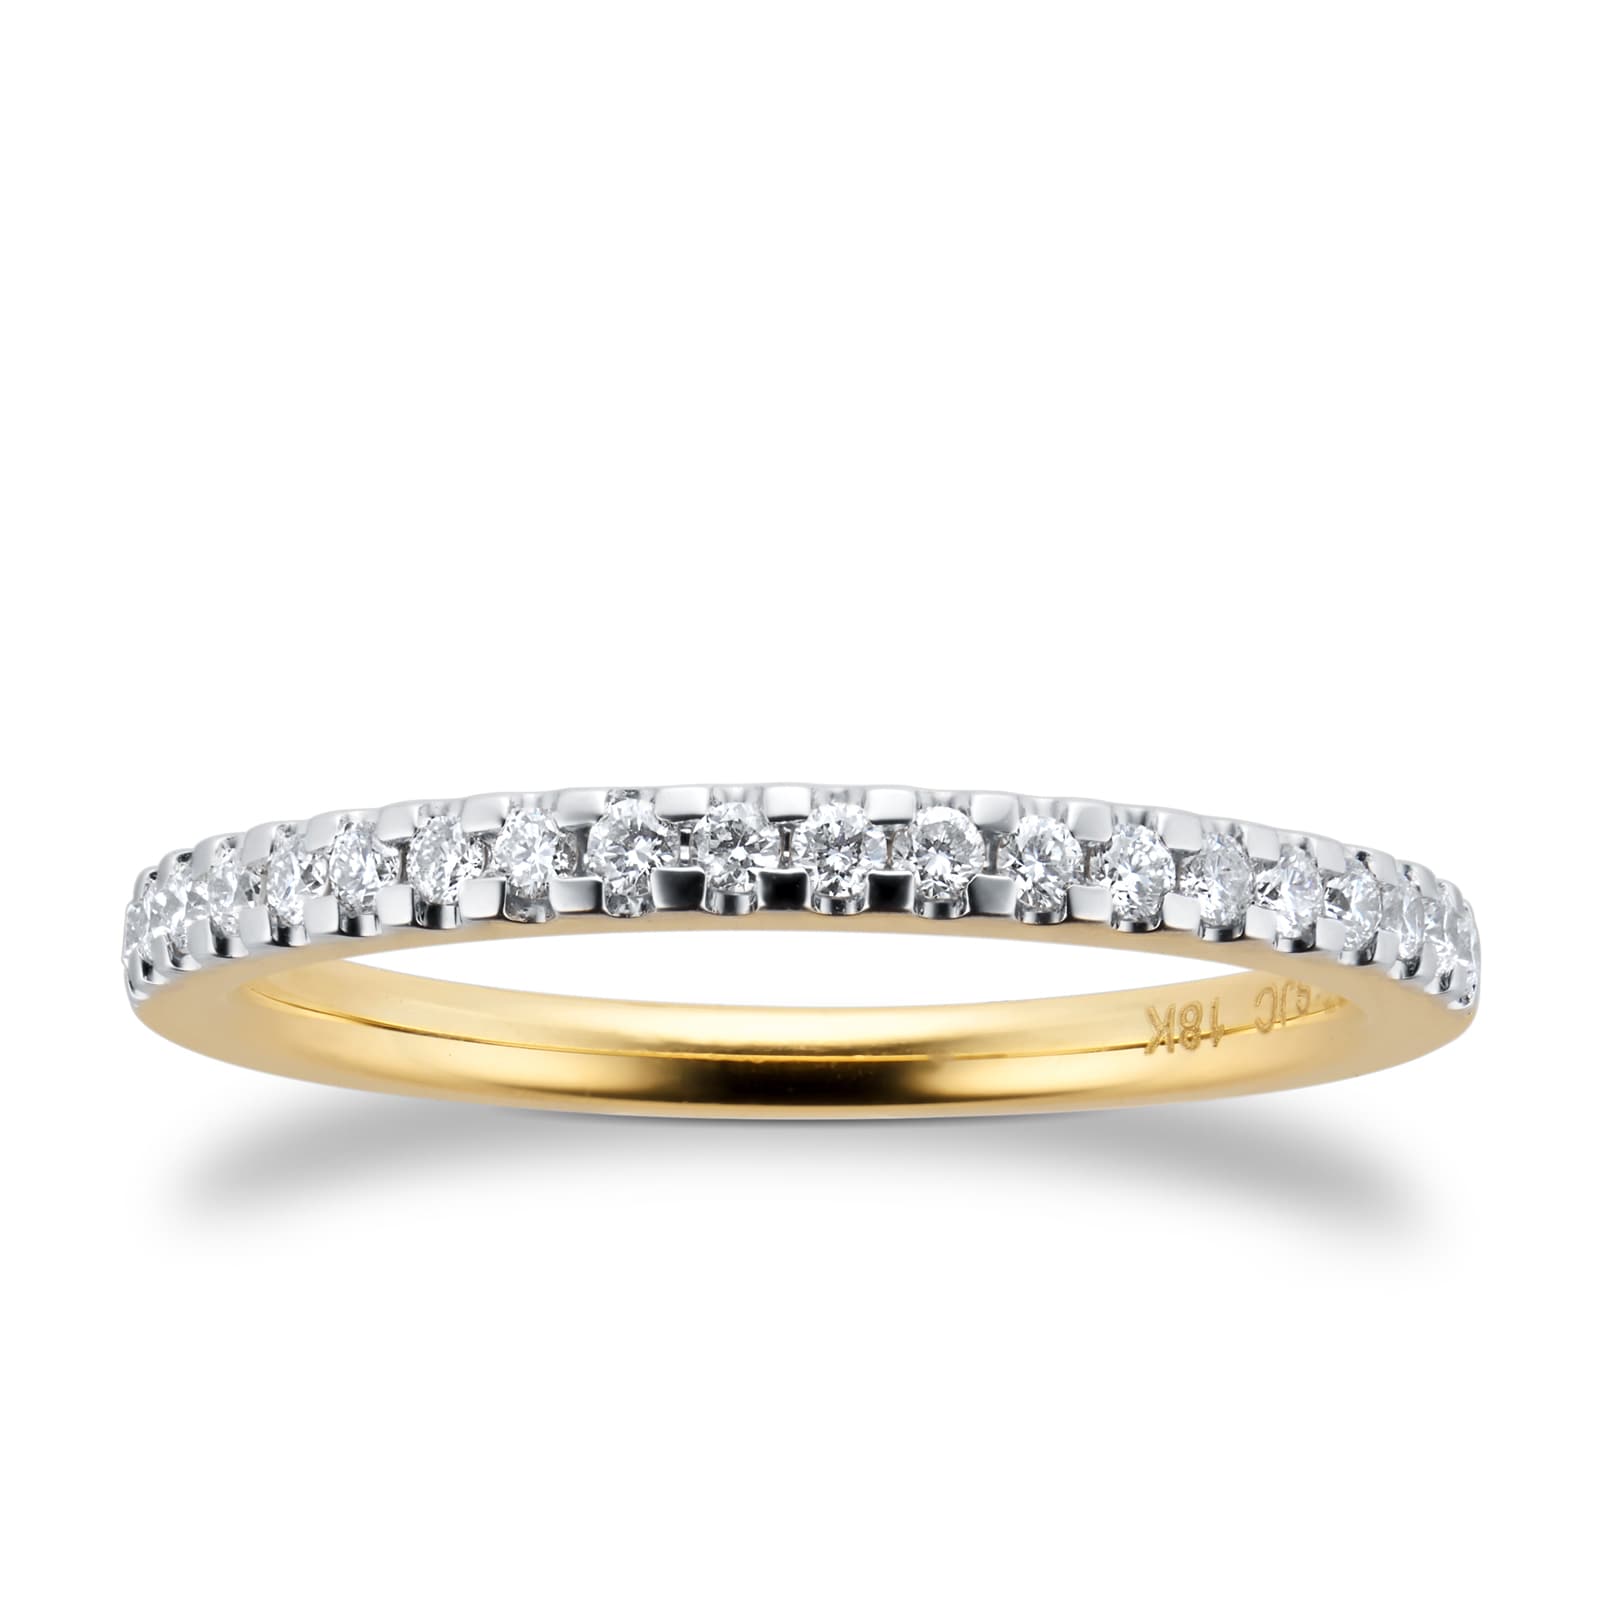 Brilliant Cut 020 Total Carat Weight Diamond Stacking Ring In 18 Carat Yellow Gold Ring Size M